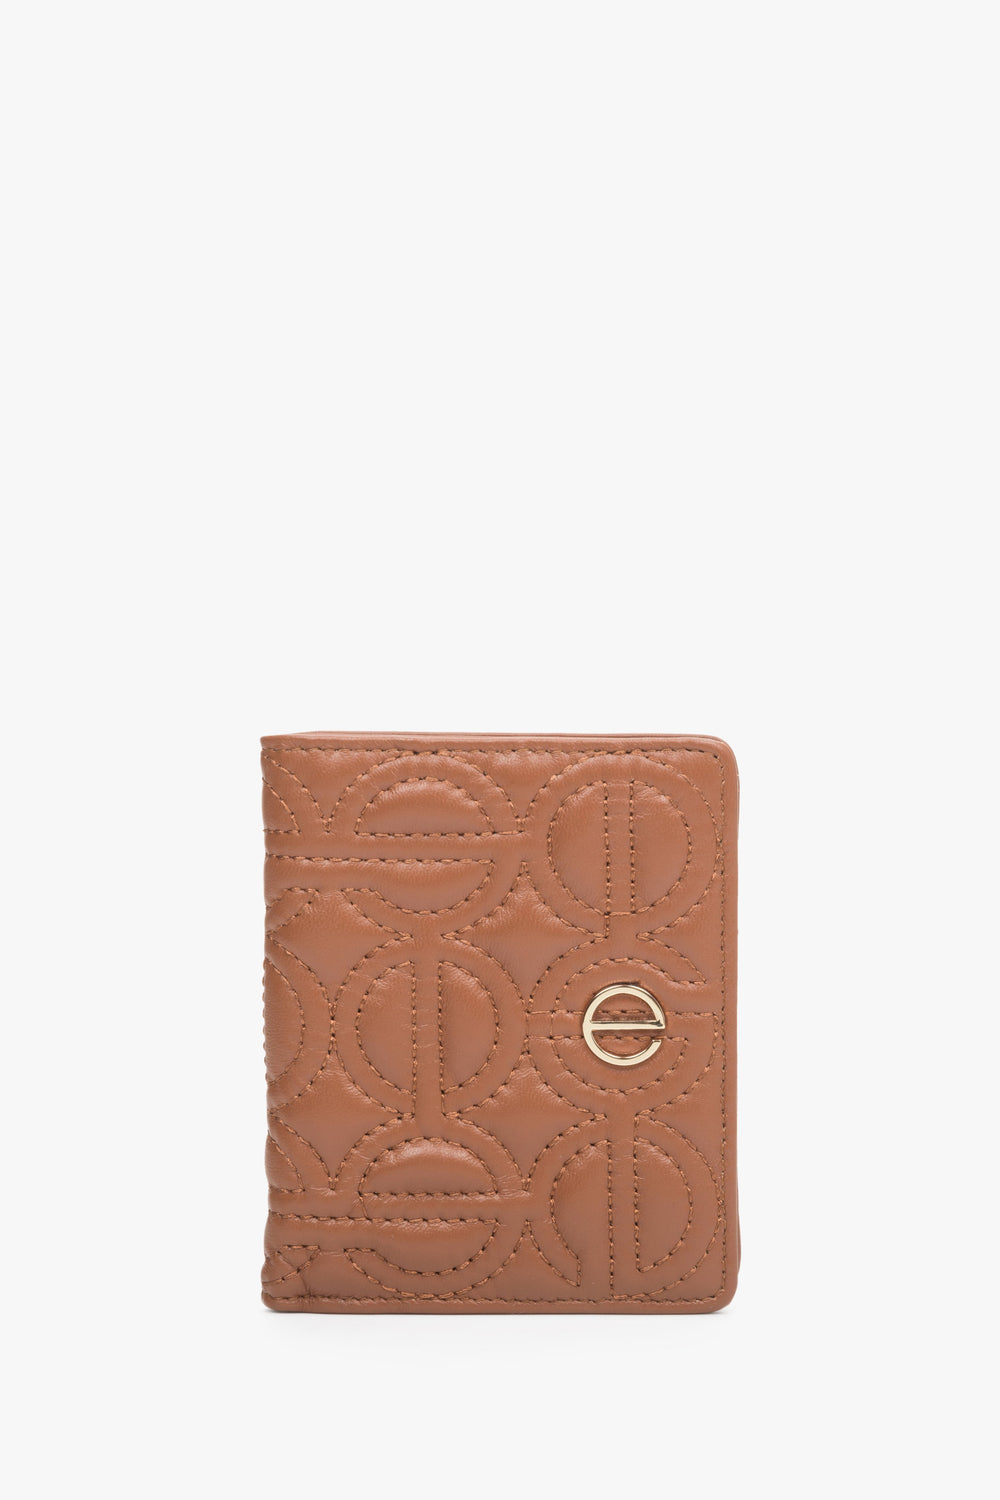 Women's Brown Card Wallet made of Genuine Leather with Gold Accents Estro ER00113658.